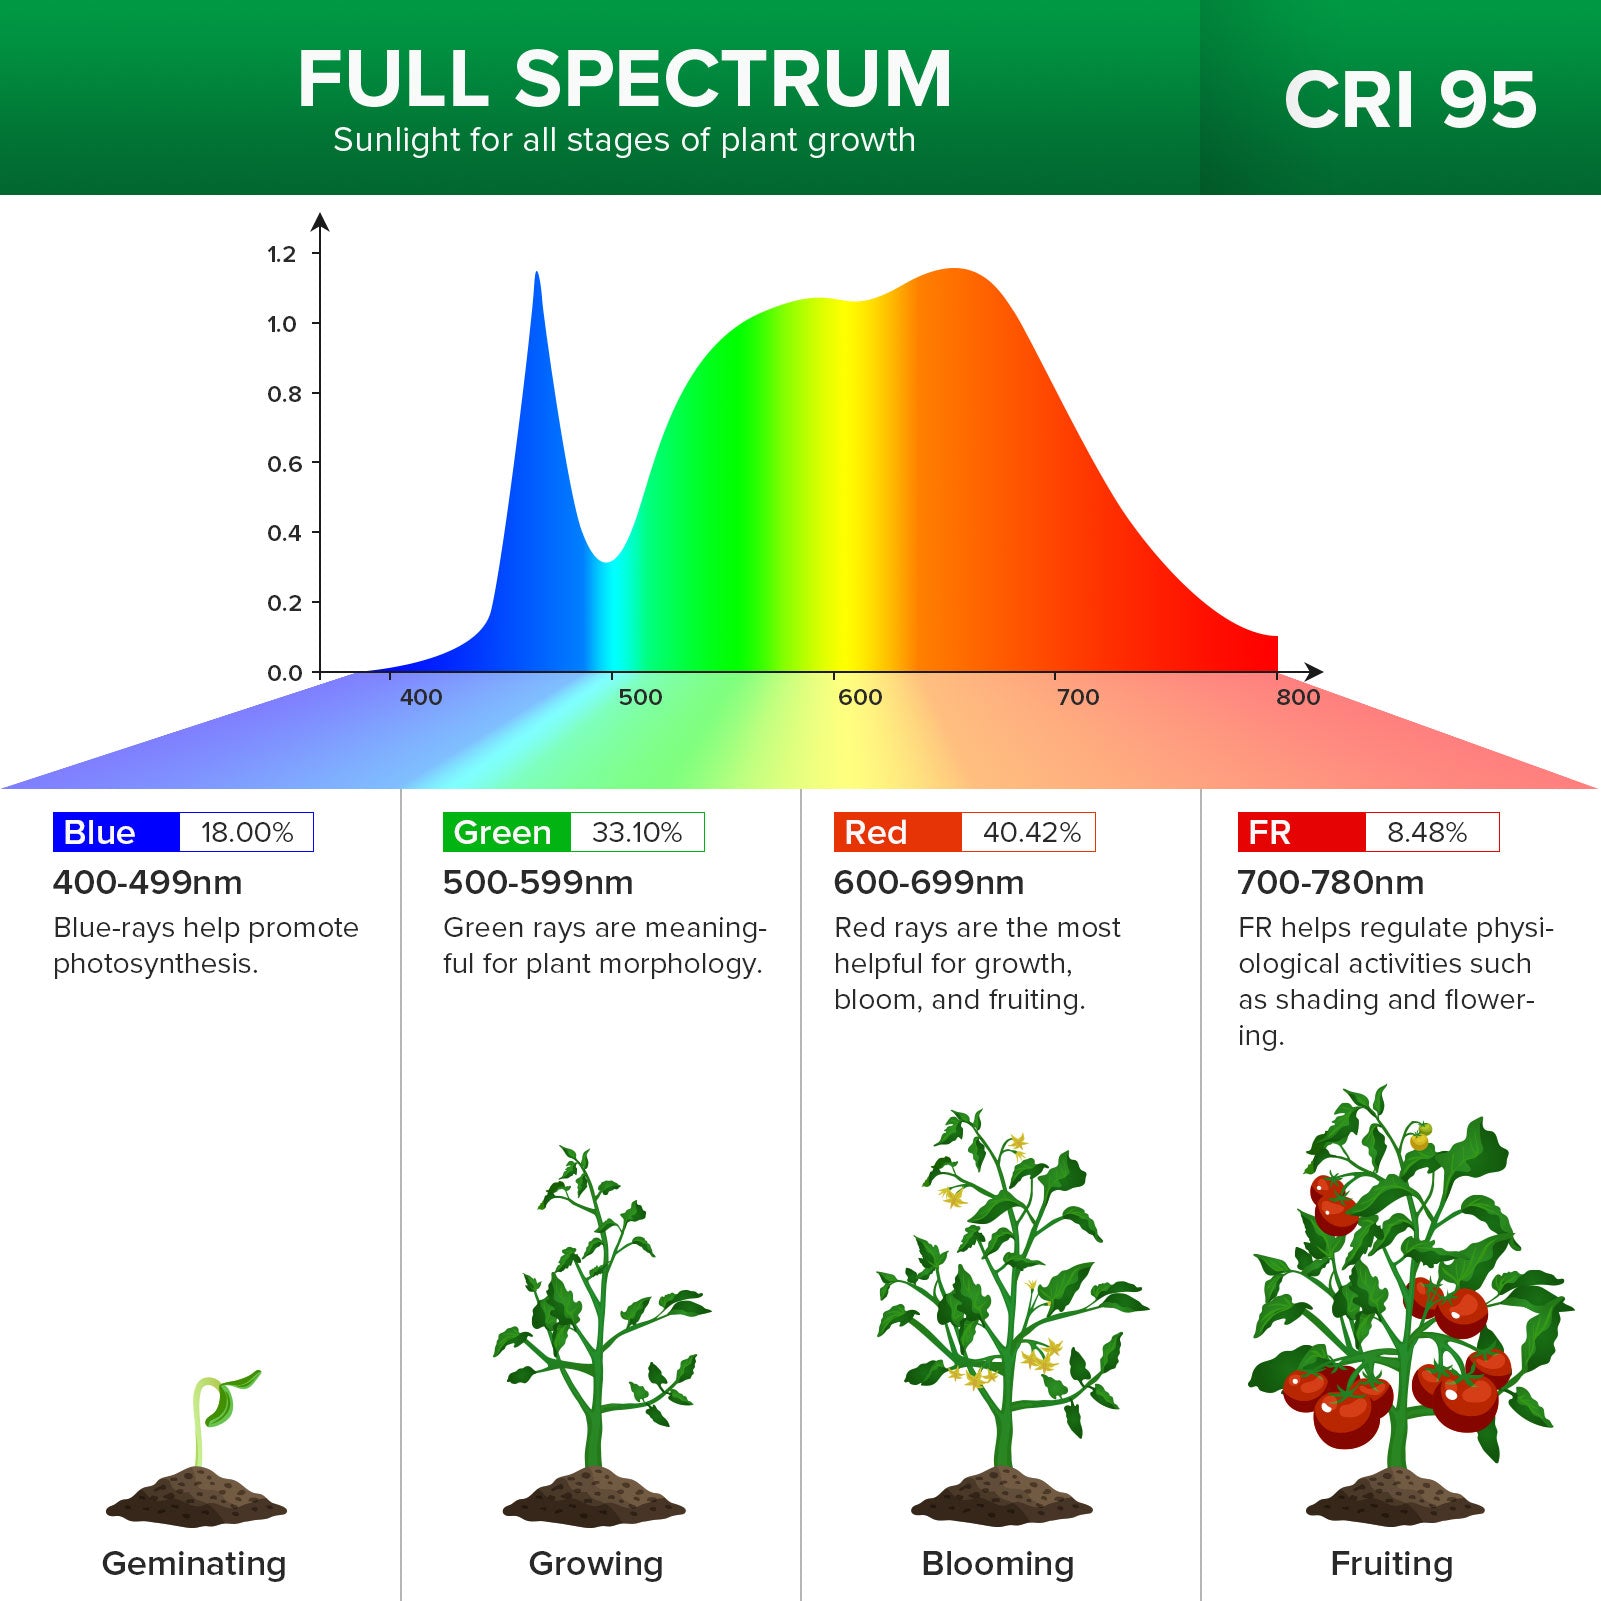 20W Adjustable 2-Head Clip-on LED Grow Light is full spectrum，sunlight for all stages of plant growth，CRI 95.